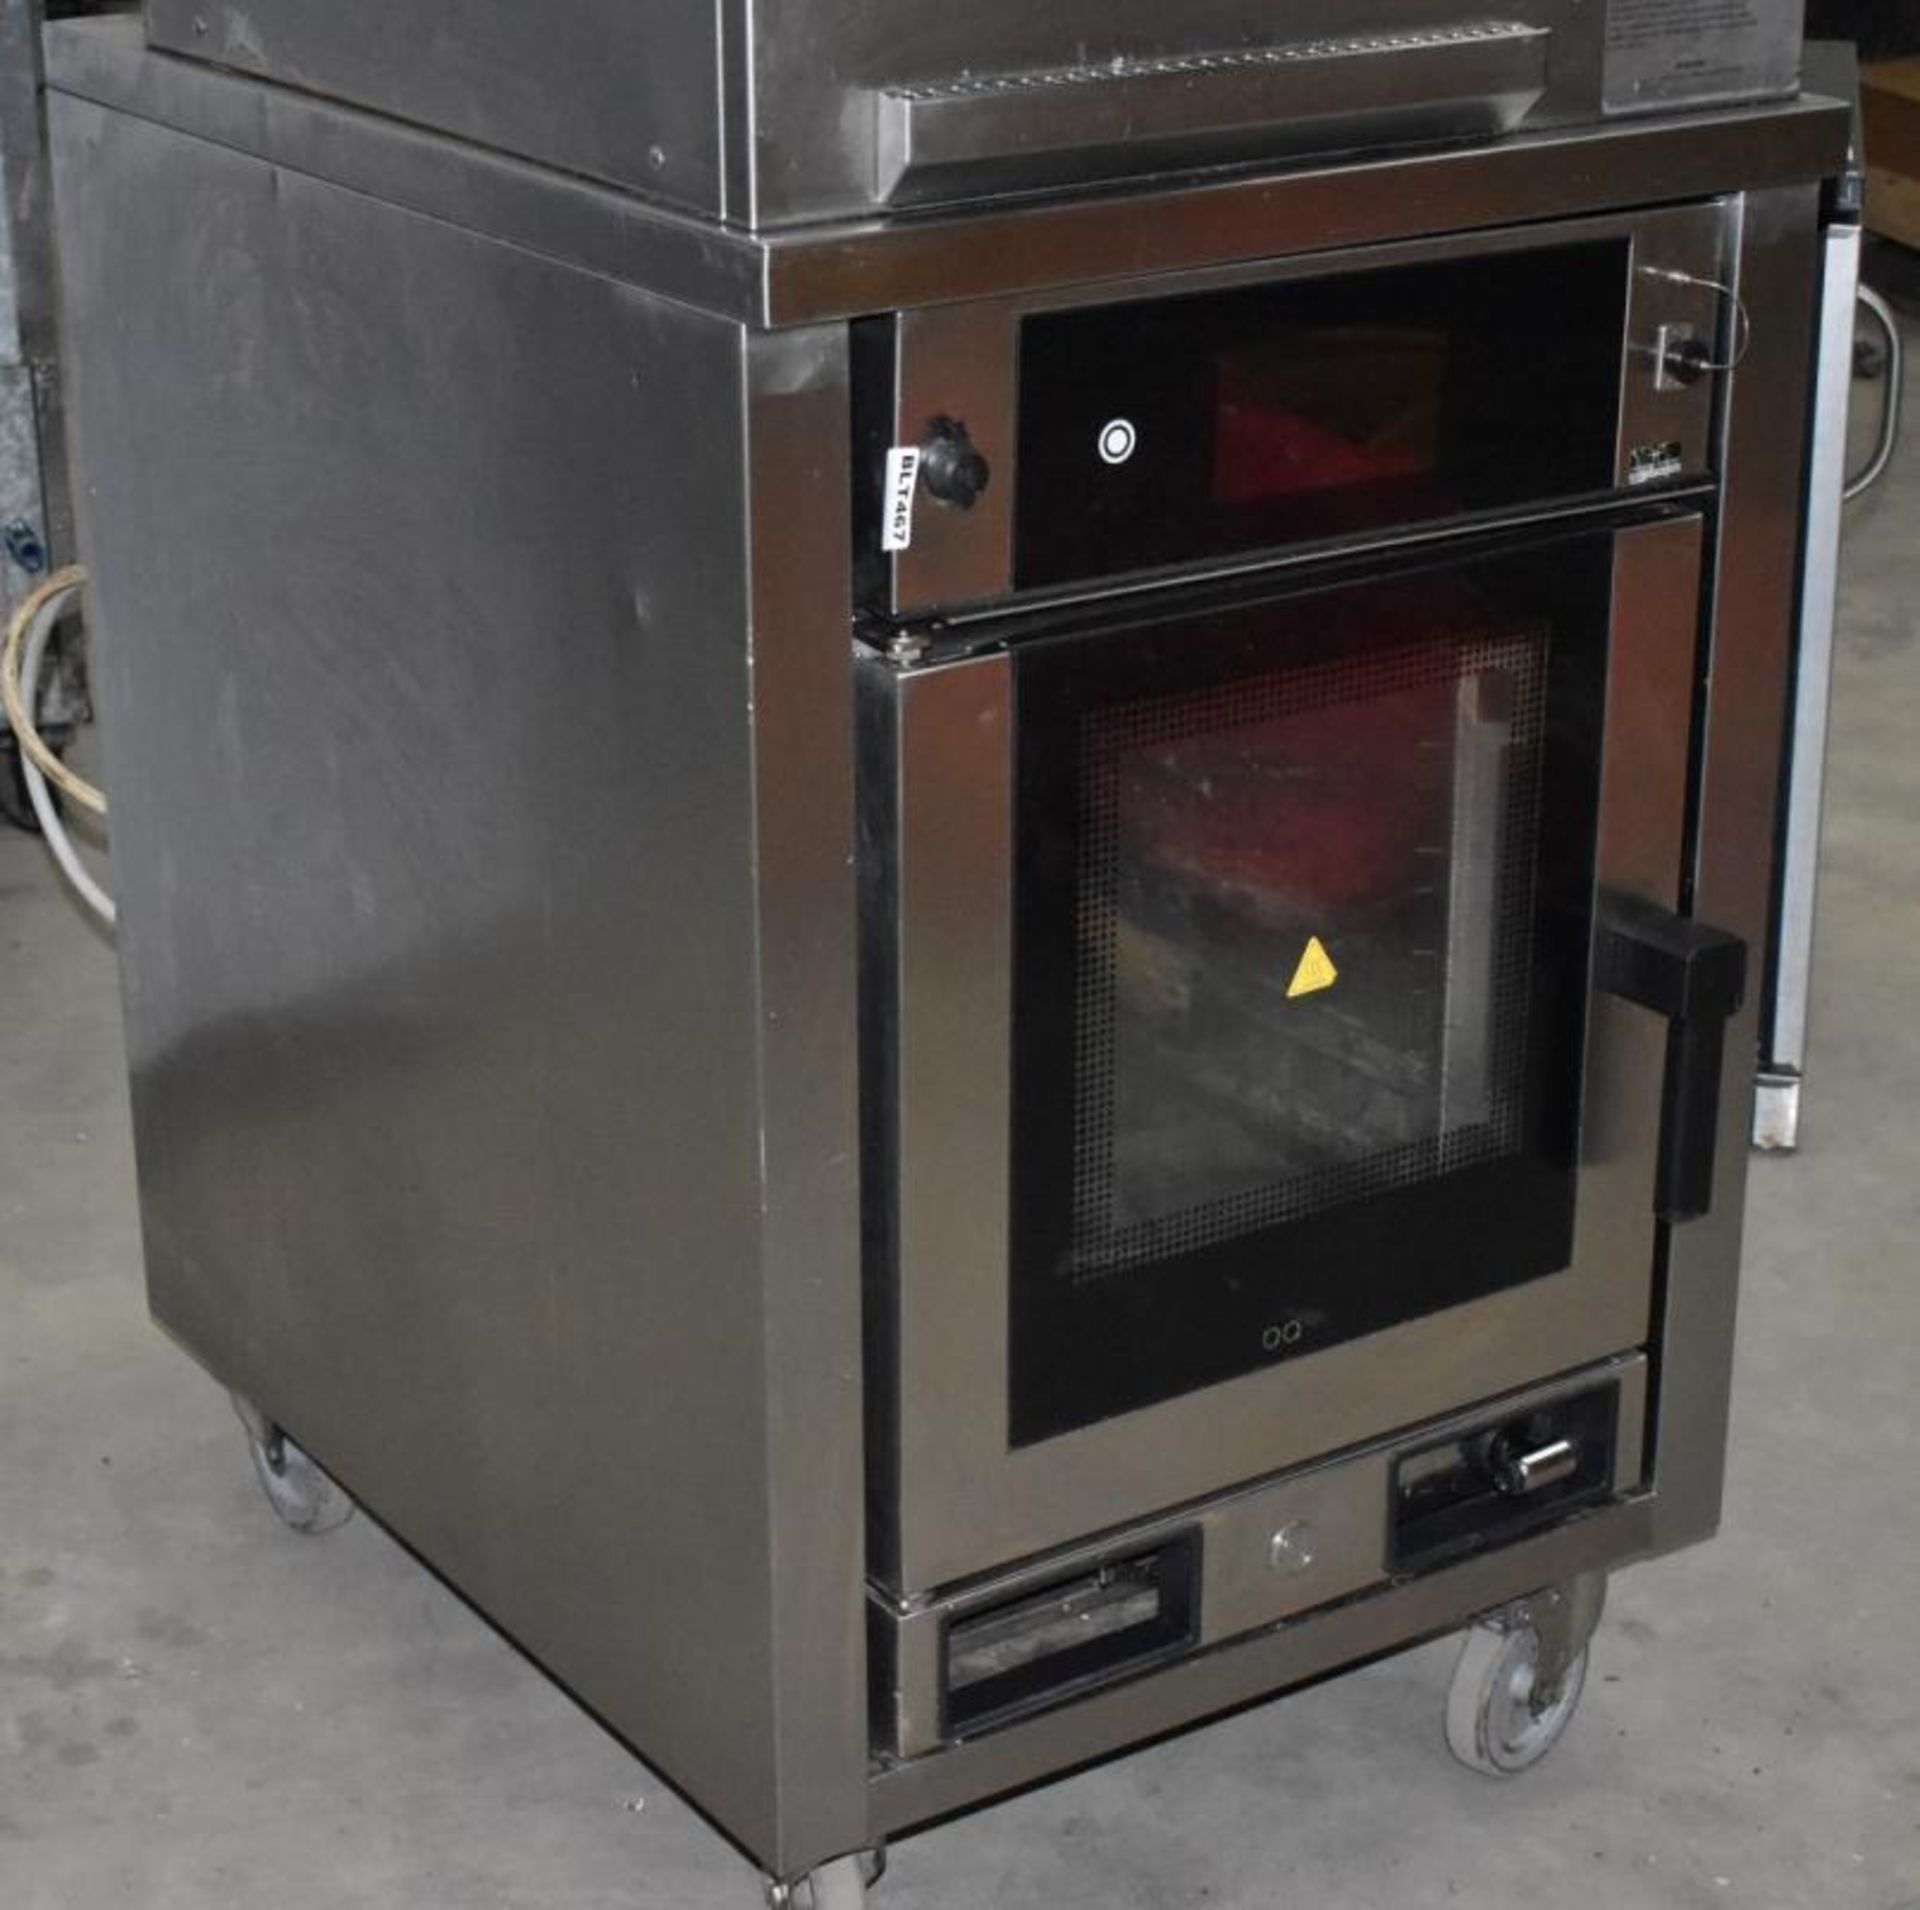 1 x Moduline Cook and Hold Convection Oven and Pressure Steamer Cooker - Features USB Connection, - Image 13 of 16